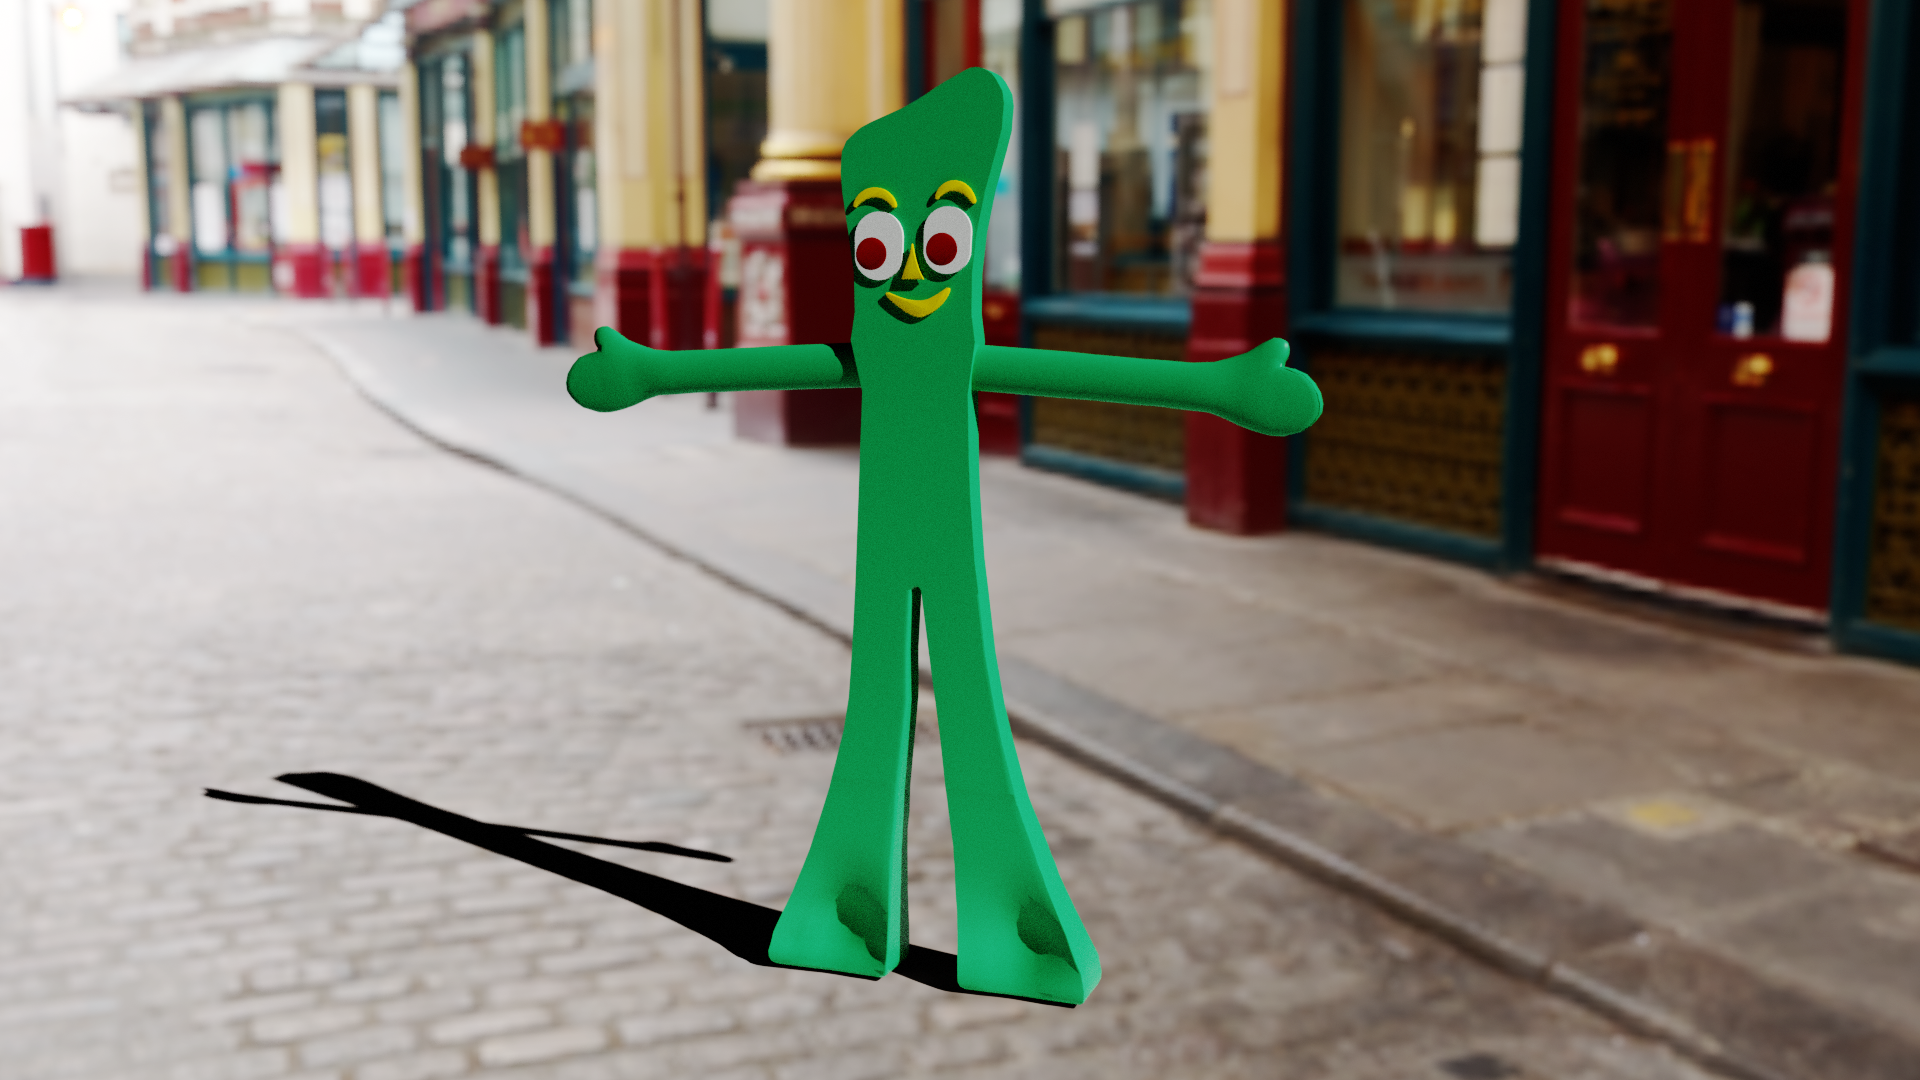 Gumby!